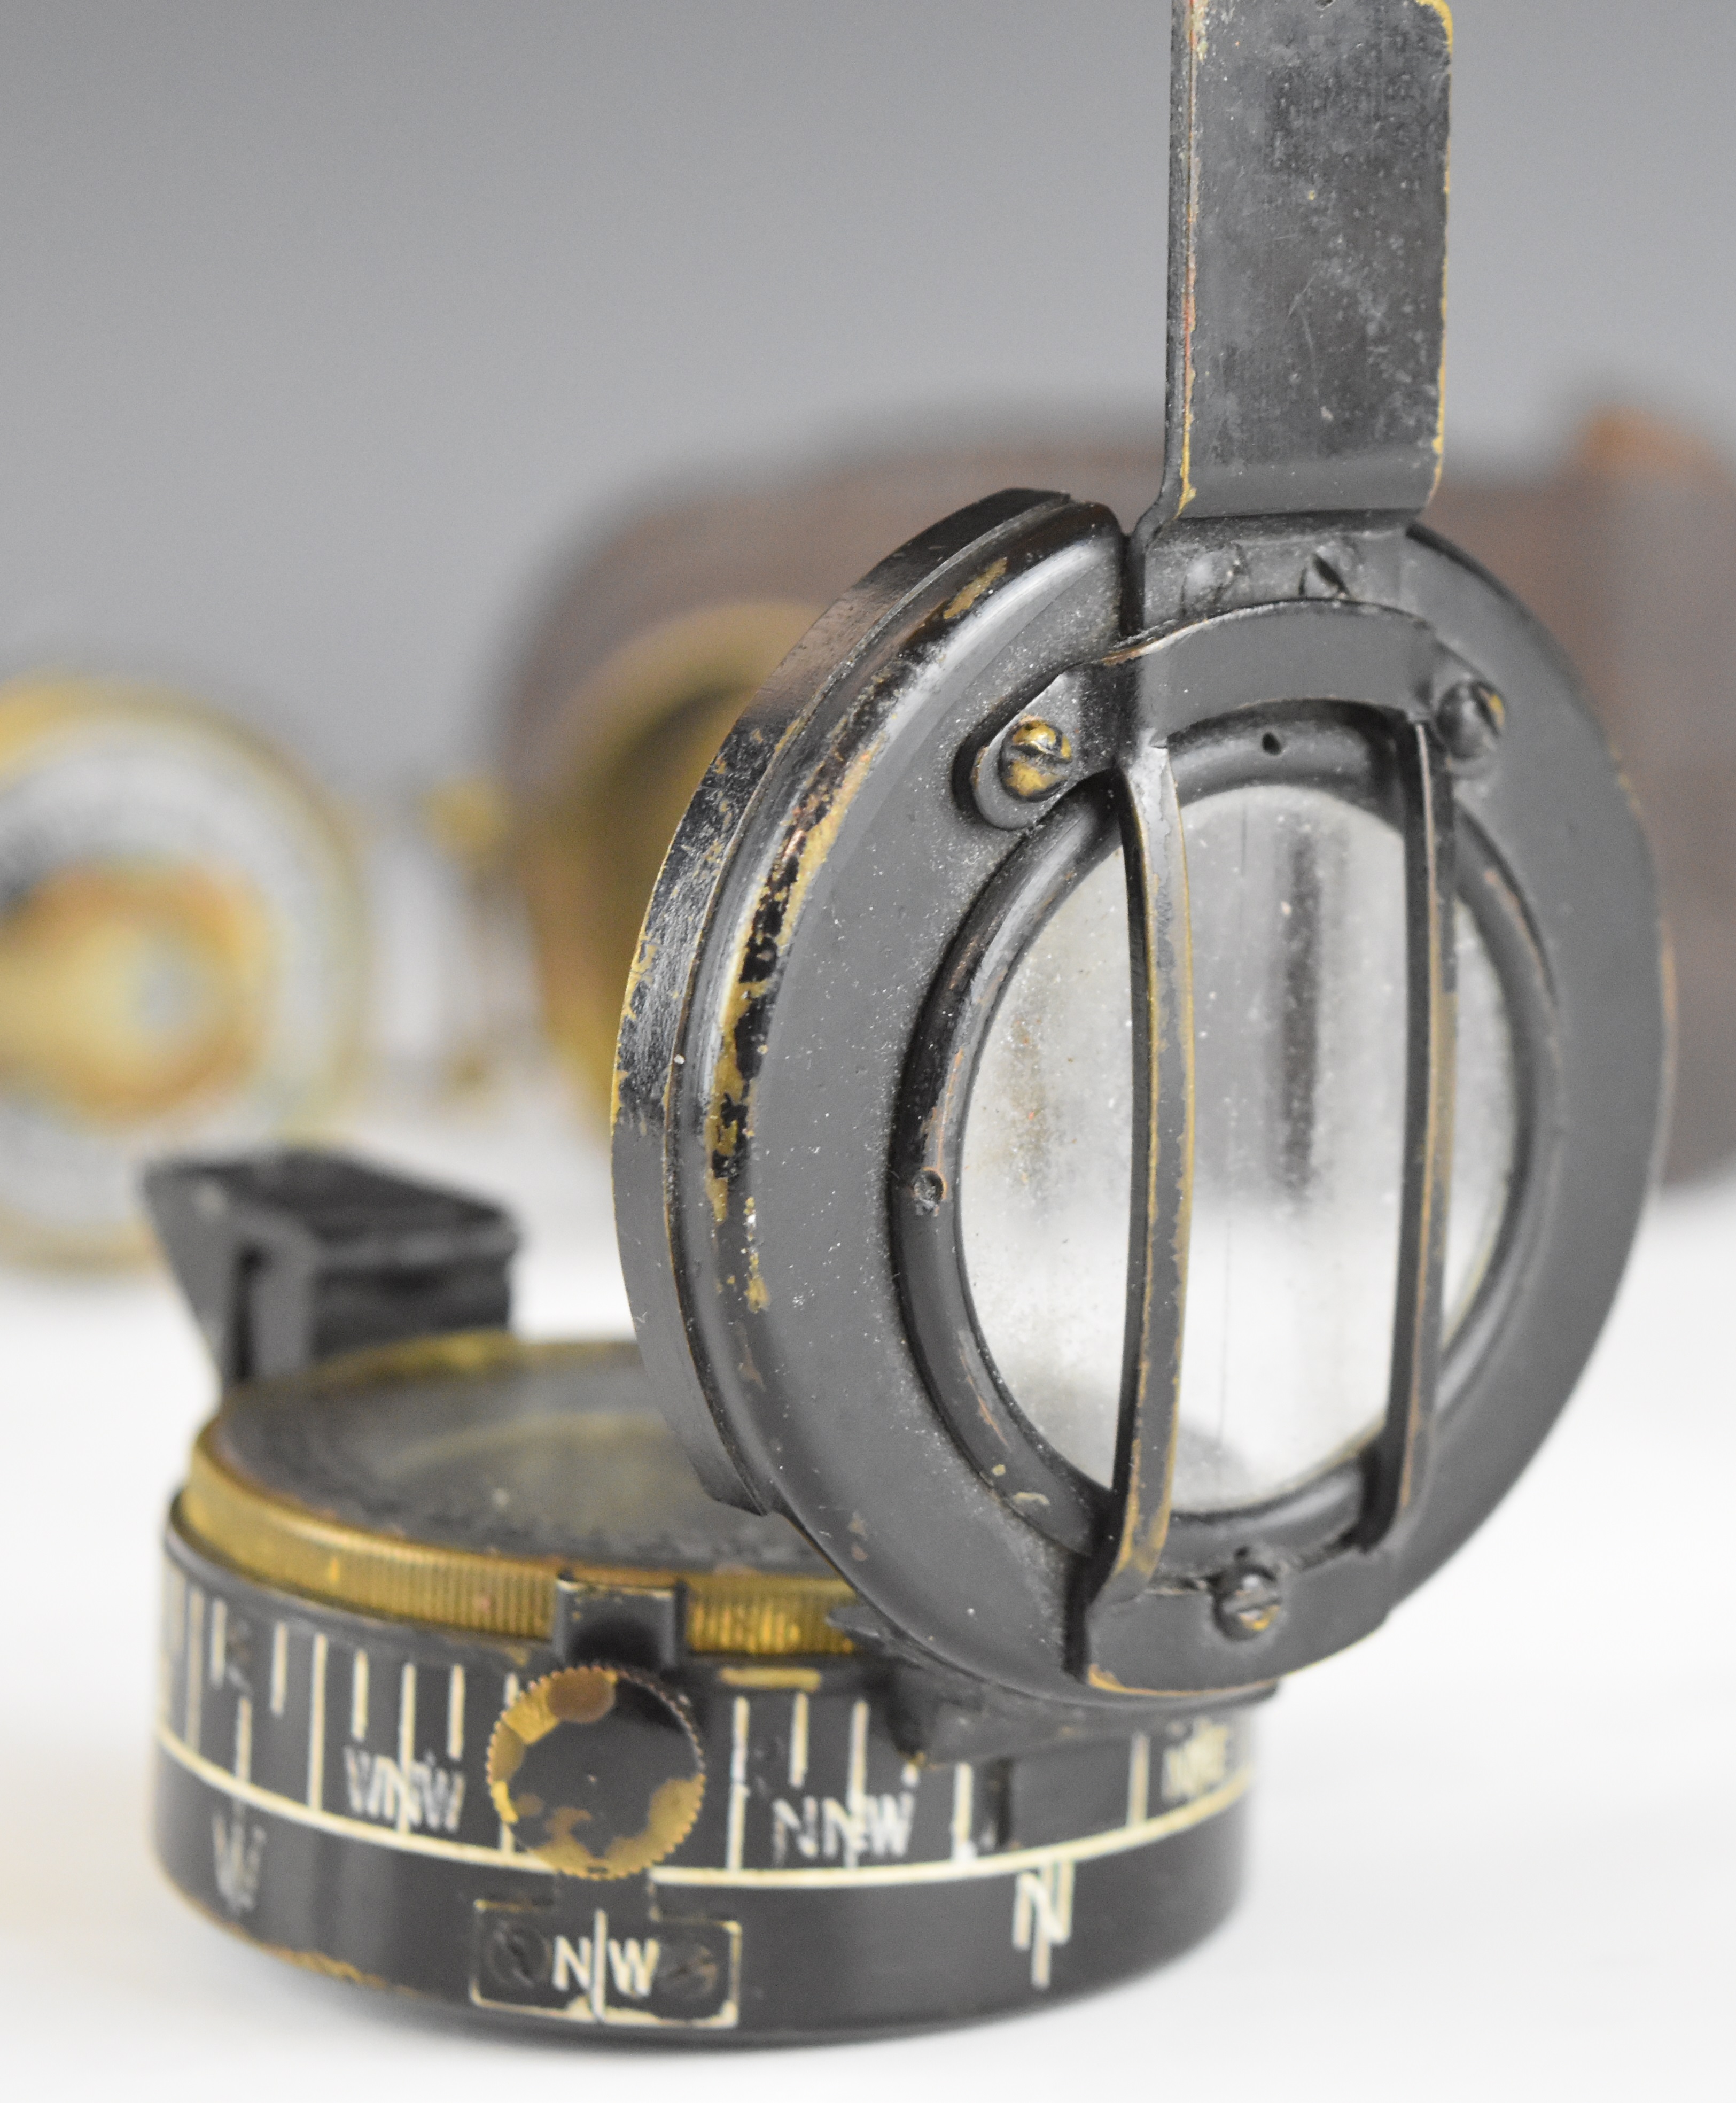 British WW2 prismatic compass by T G Co Ltd, London No B187104 1942 Mk III, with broad arrow mark, - Image 5 of 10